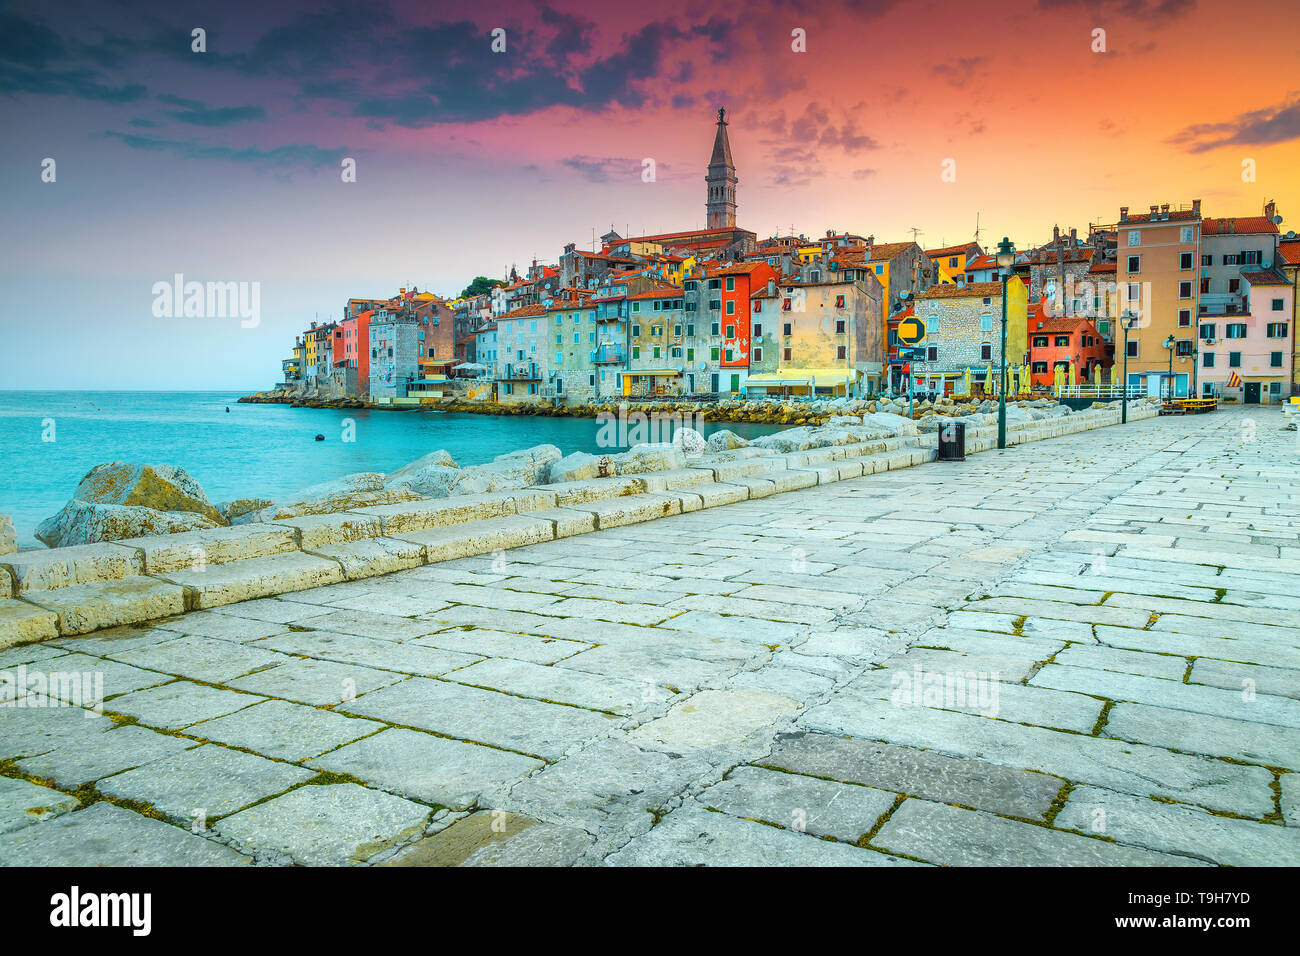 Popular vacation place, colorful old mediterranean buildings and seashore with spectacular promenade at sunset, Rovinj, Istria region, Croatia, Europe Stock Photo